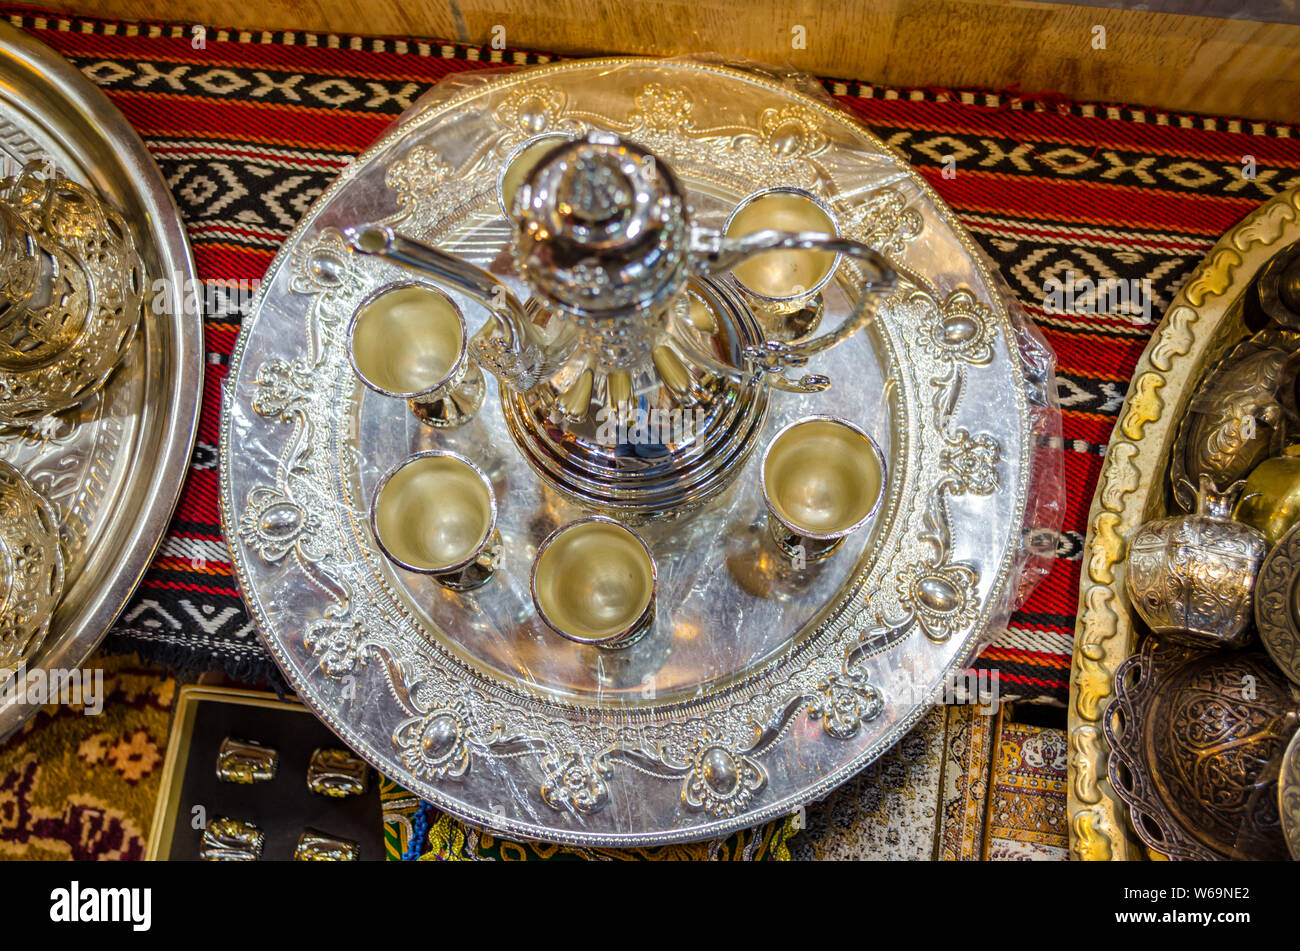 Omani Coffee (kahwa) cups and the jug on display in Muscat, Oman. Stock Photo